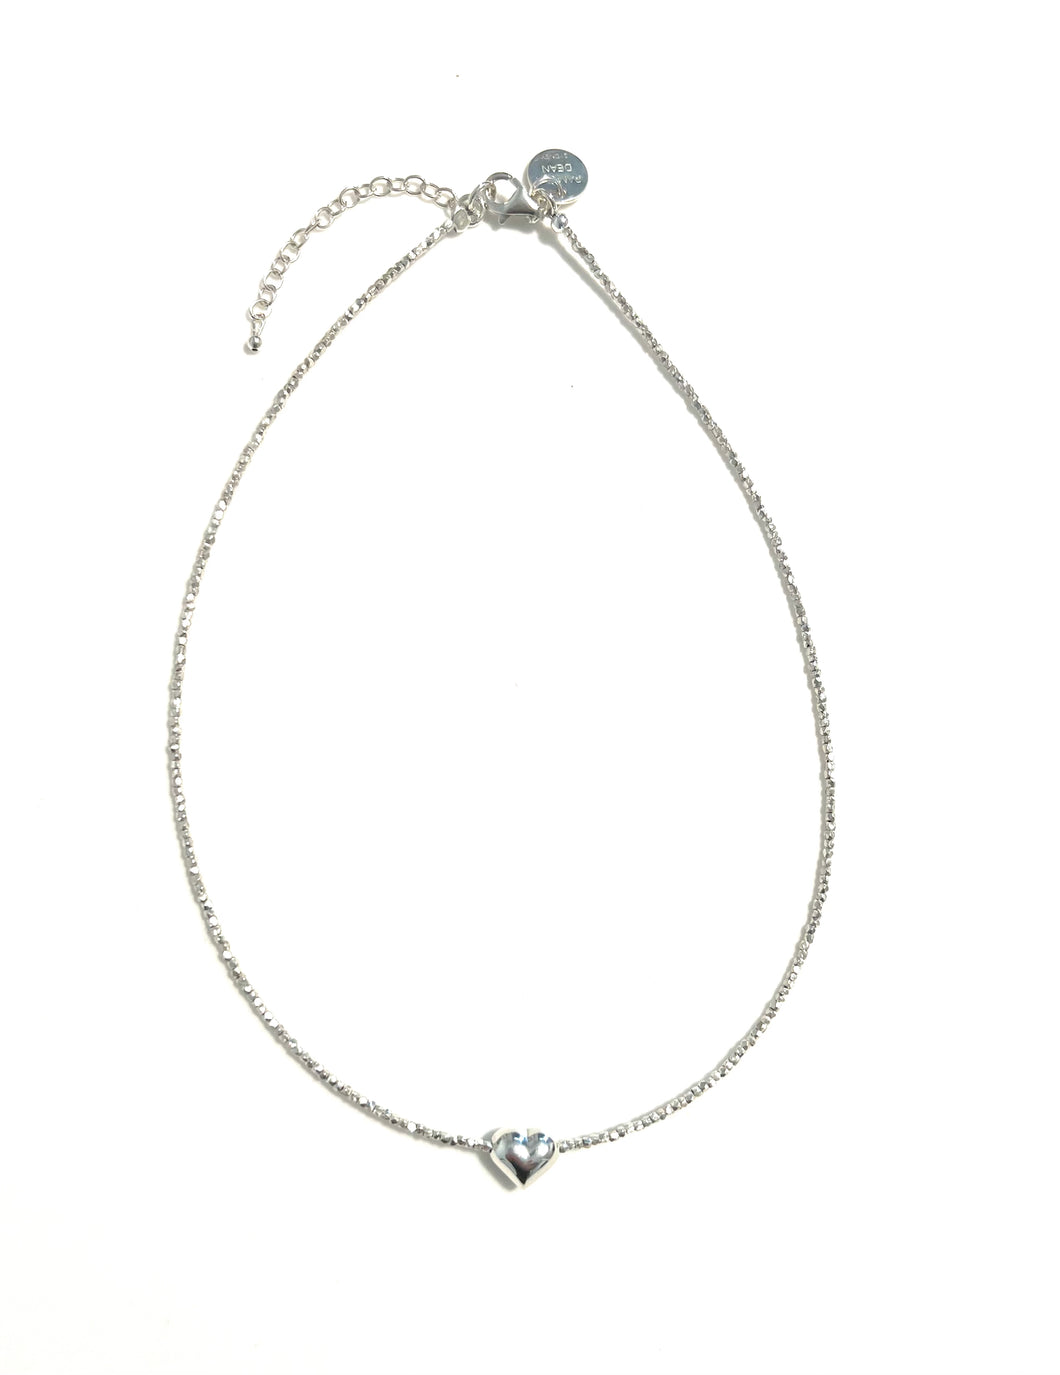 Sterling Silver Chain Necklace with Sterling Silver Heart